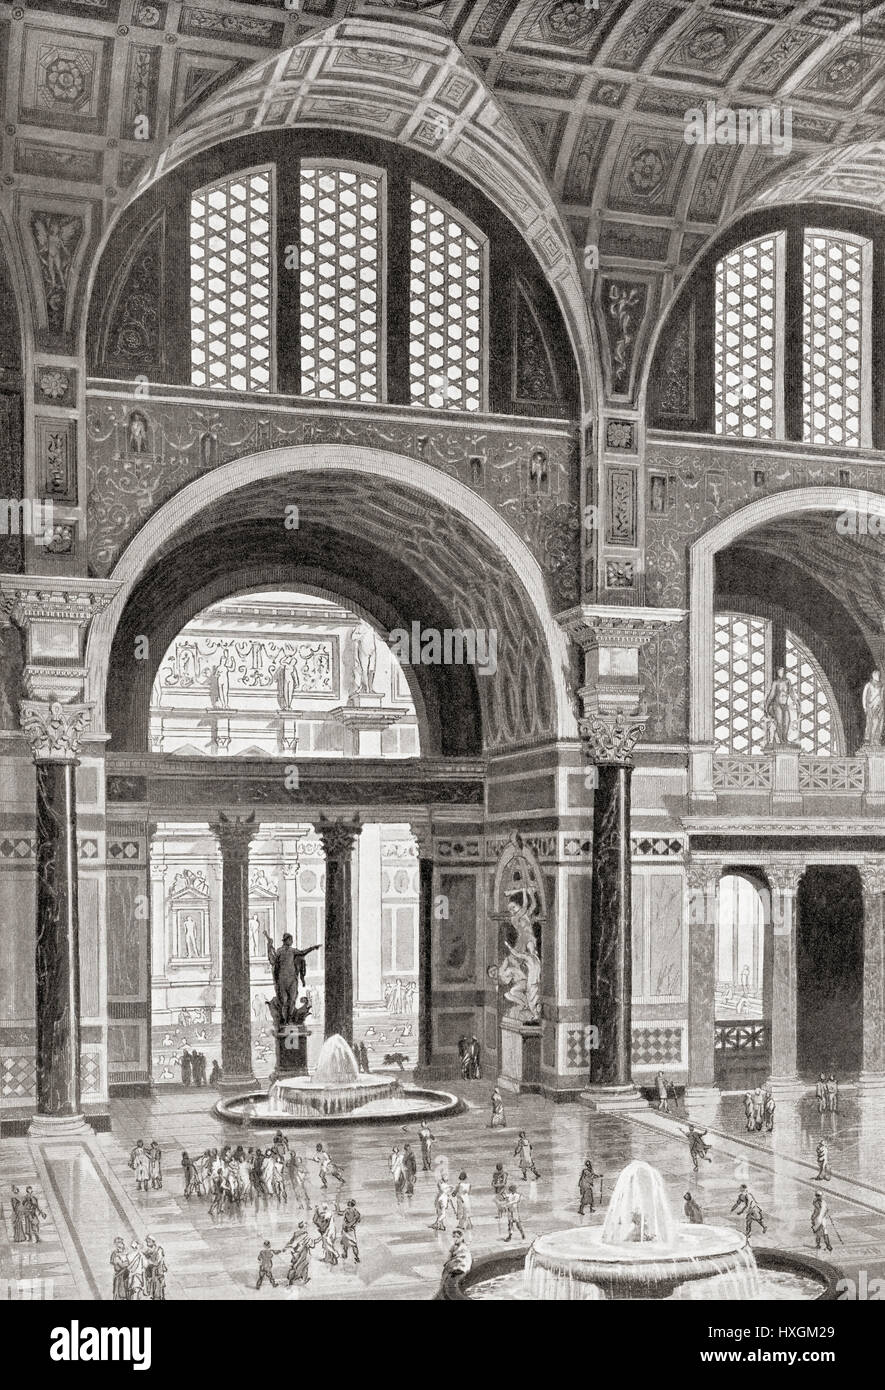 Artist's reconstruction of the Baths of Caracalla, Rome, Italy.  From Hutchinson's History of the Nations, published 1915. Stock Photo